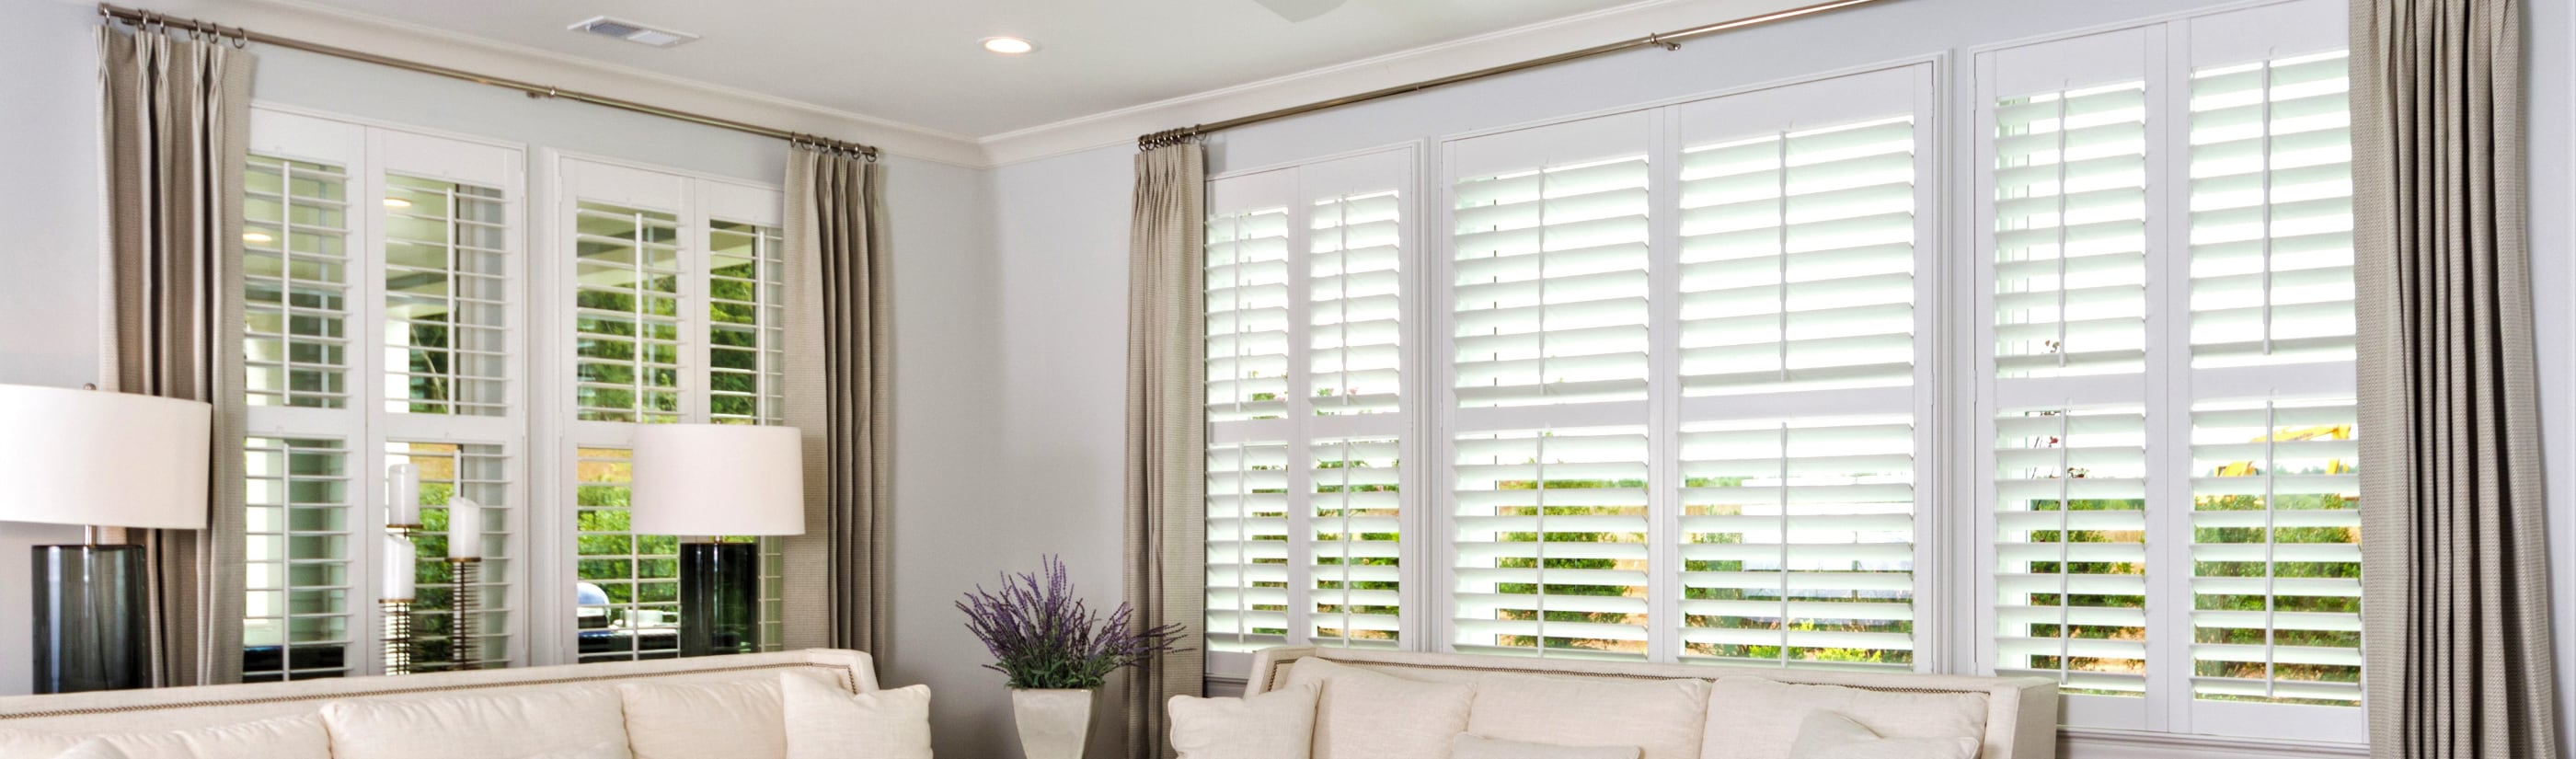 Polywood Shutters Paints In Southern California